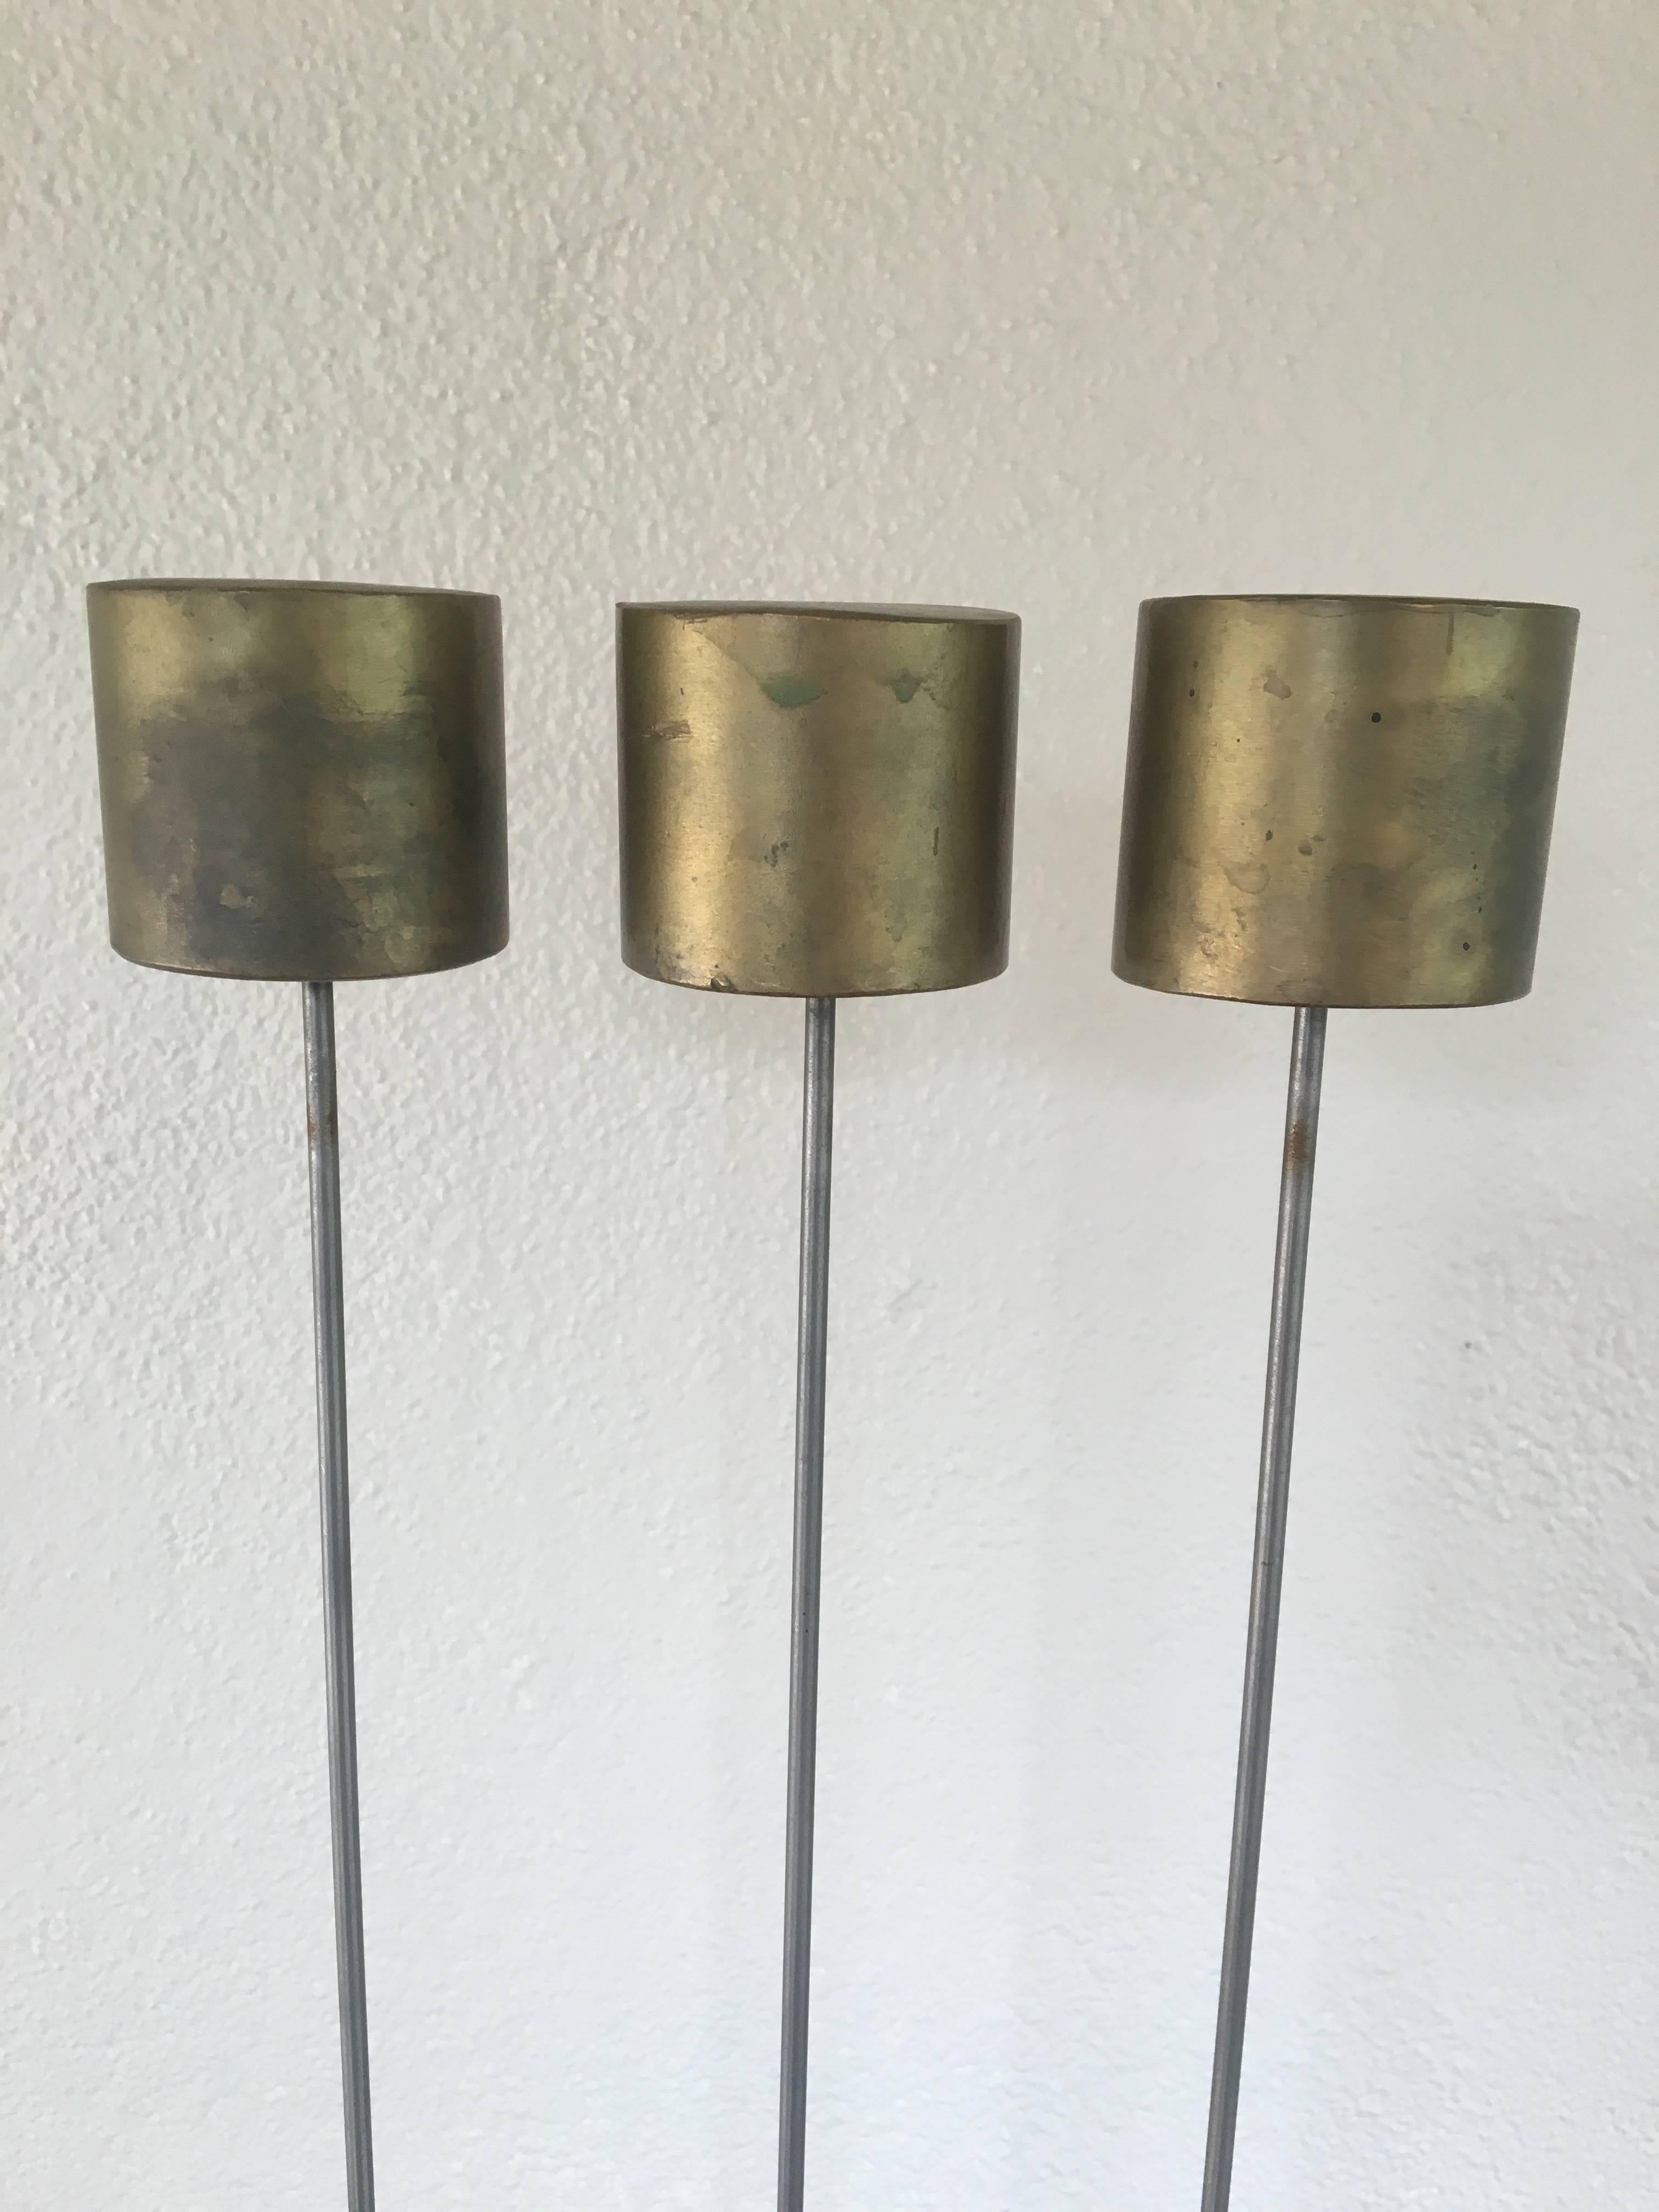 Three rod sonambient sound sculpture by the son of Harry Bertoia. The large tops produced a deep sound. Beautiful patina. Signed and certificate of authenticity from the Bertoia studio available.